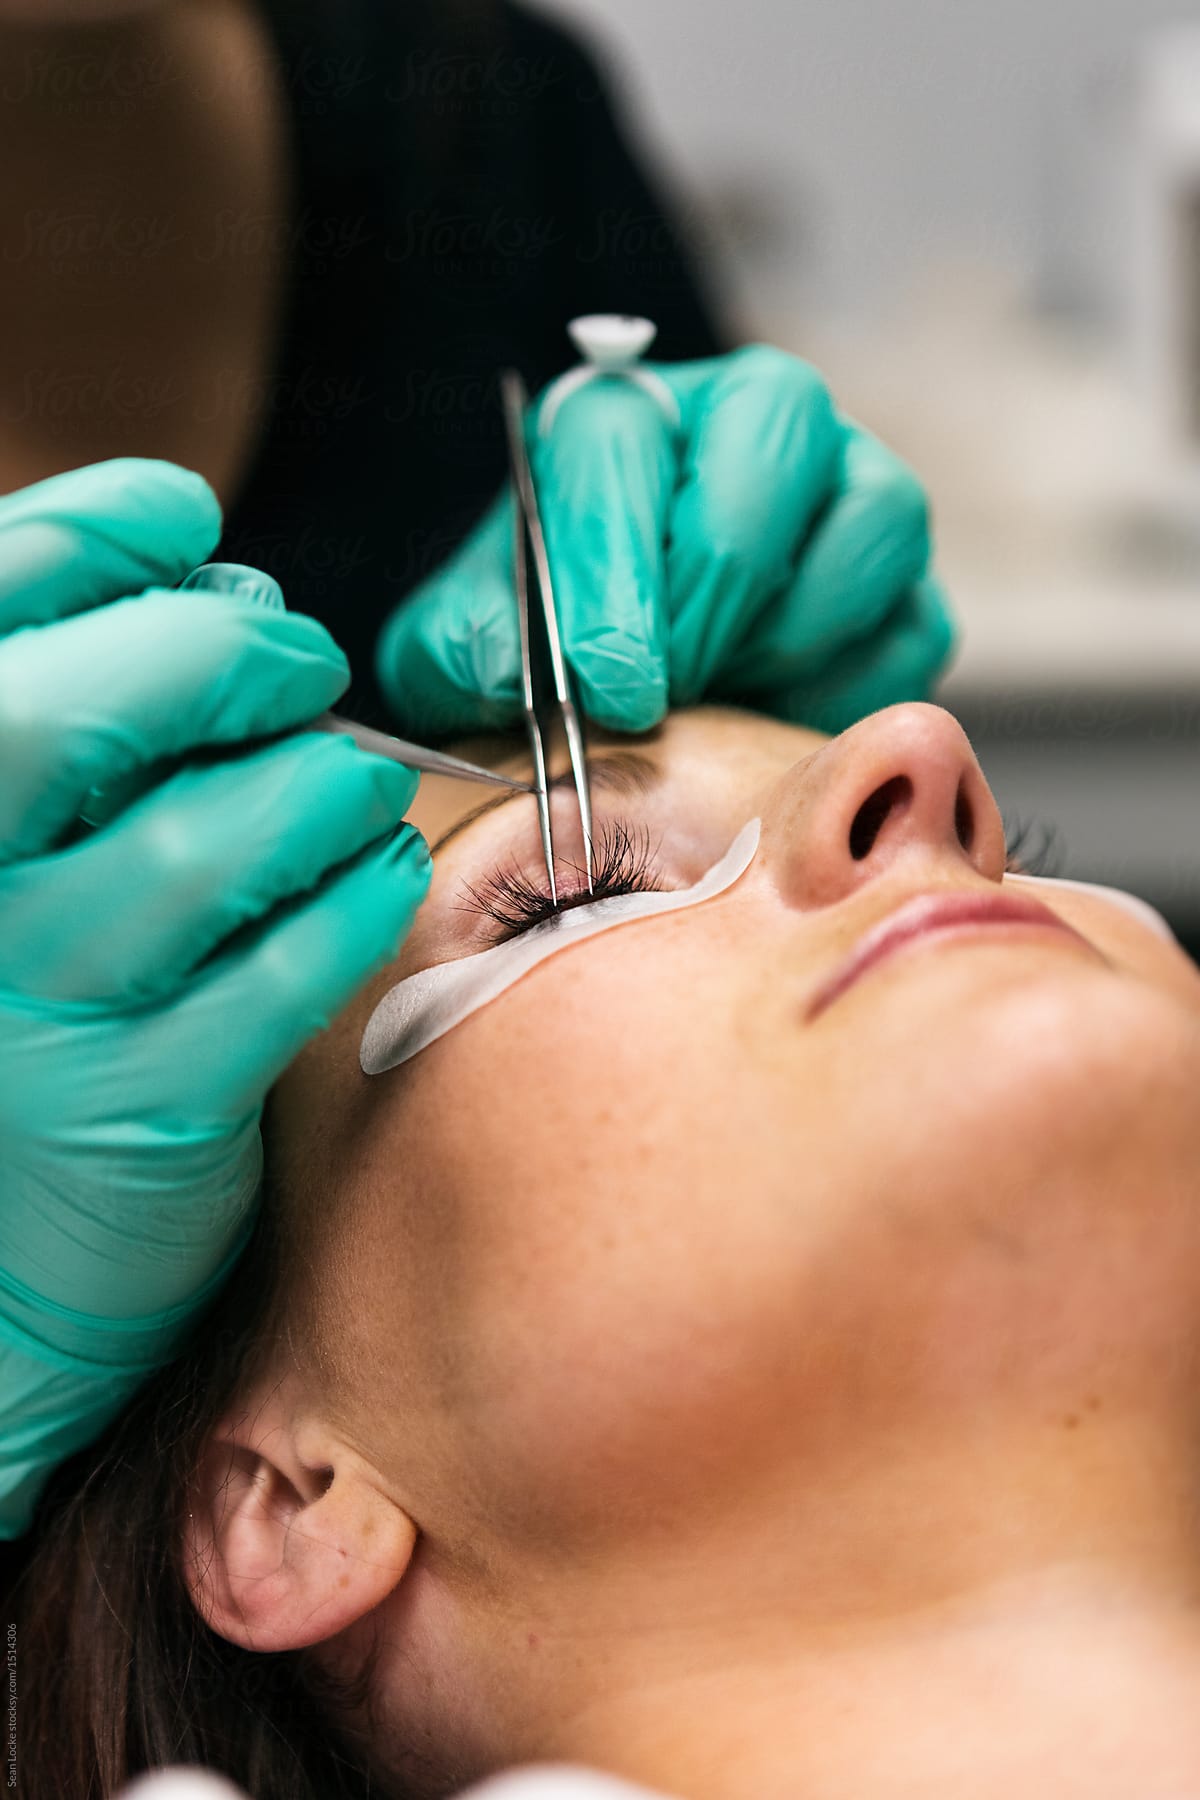 Spa: Aesthetician Applies Eyelash Extensions To Patient